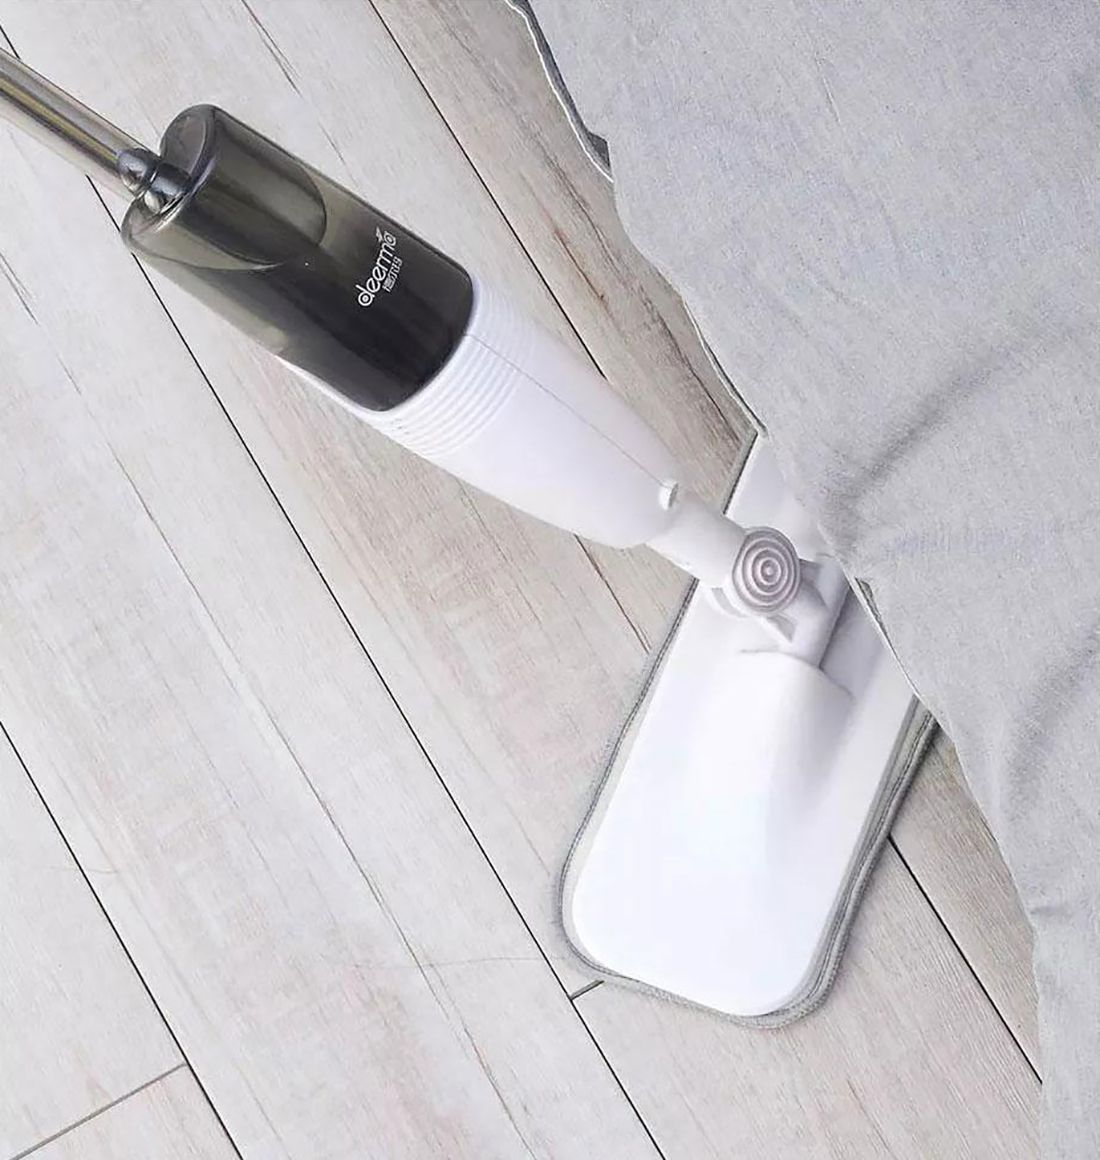 Mop that can turn 360°